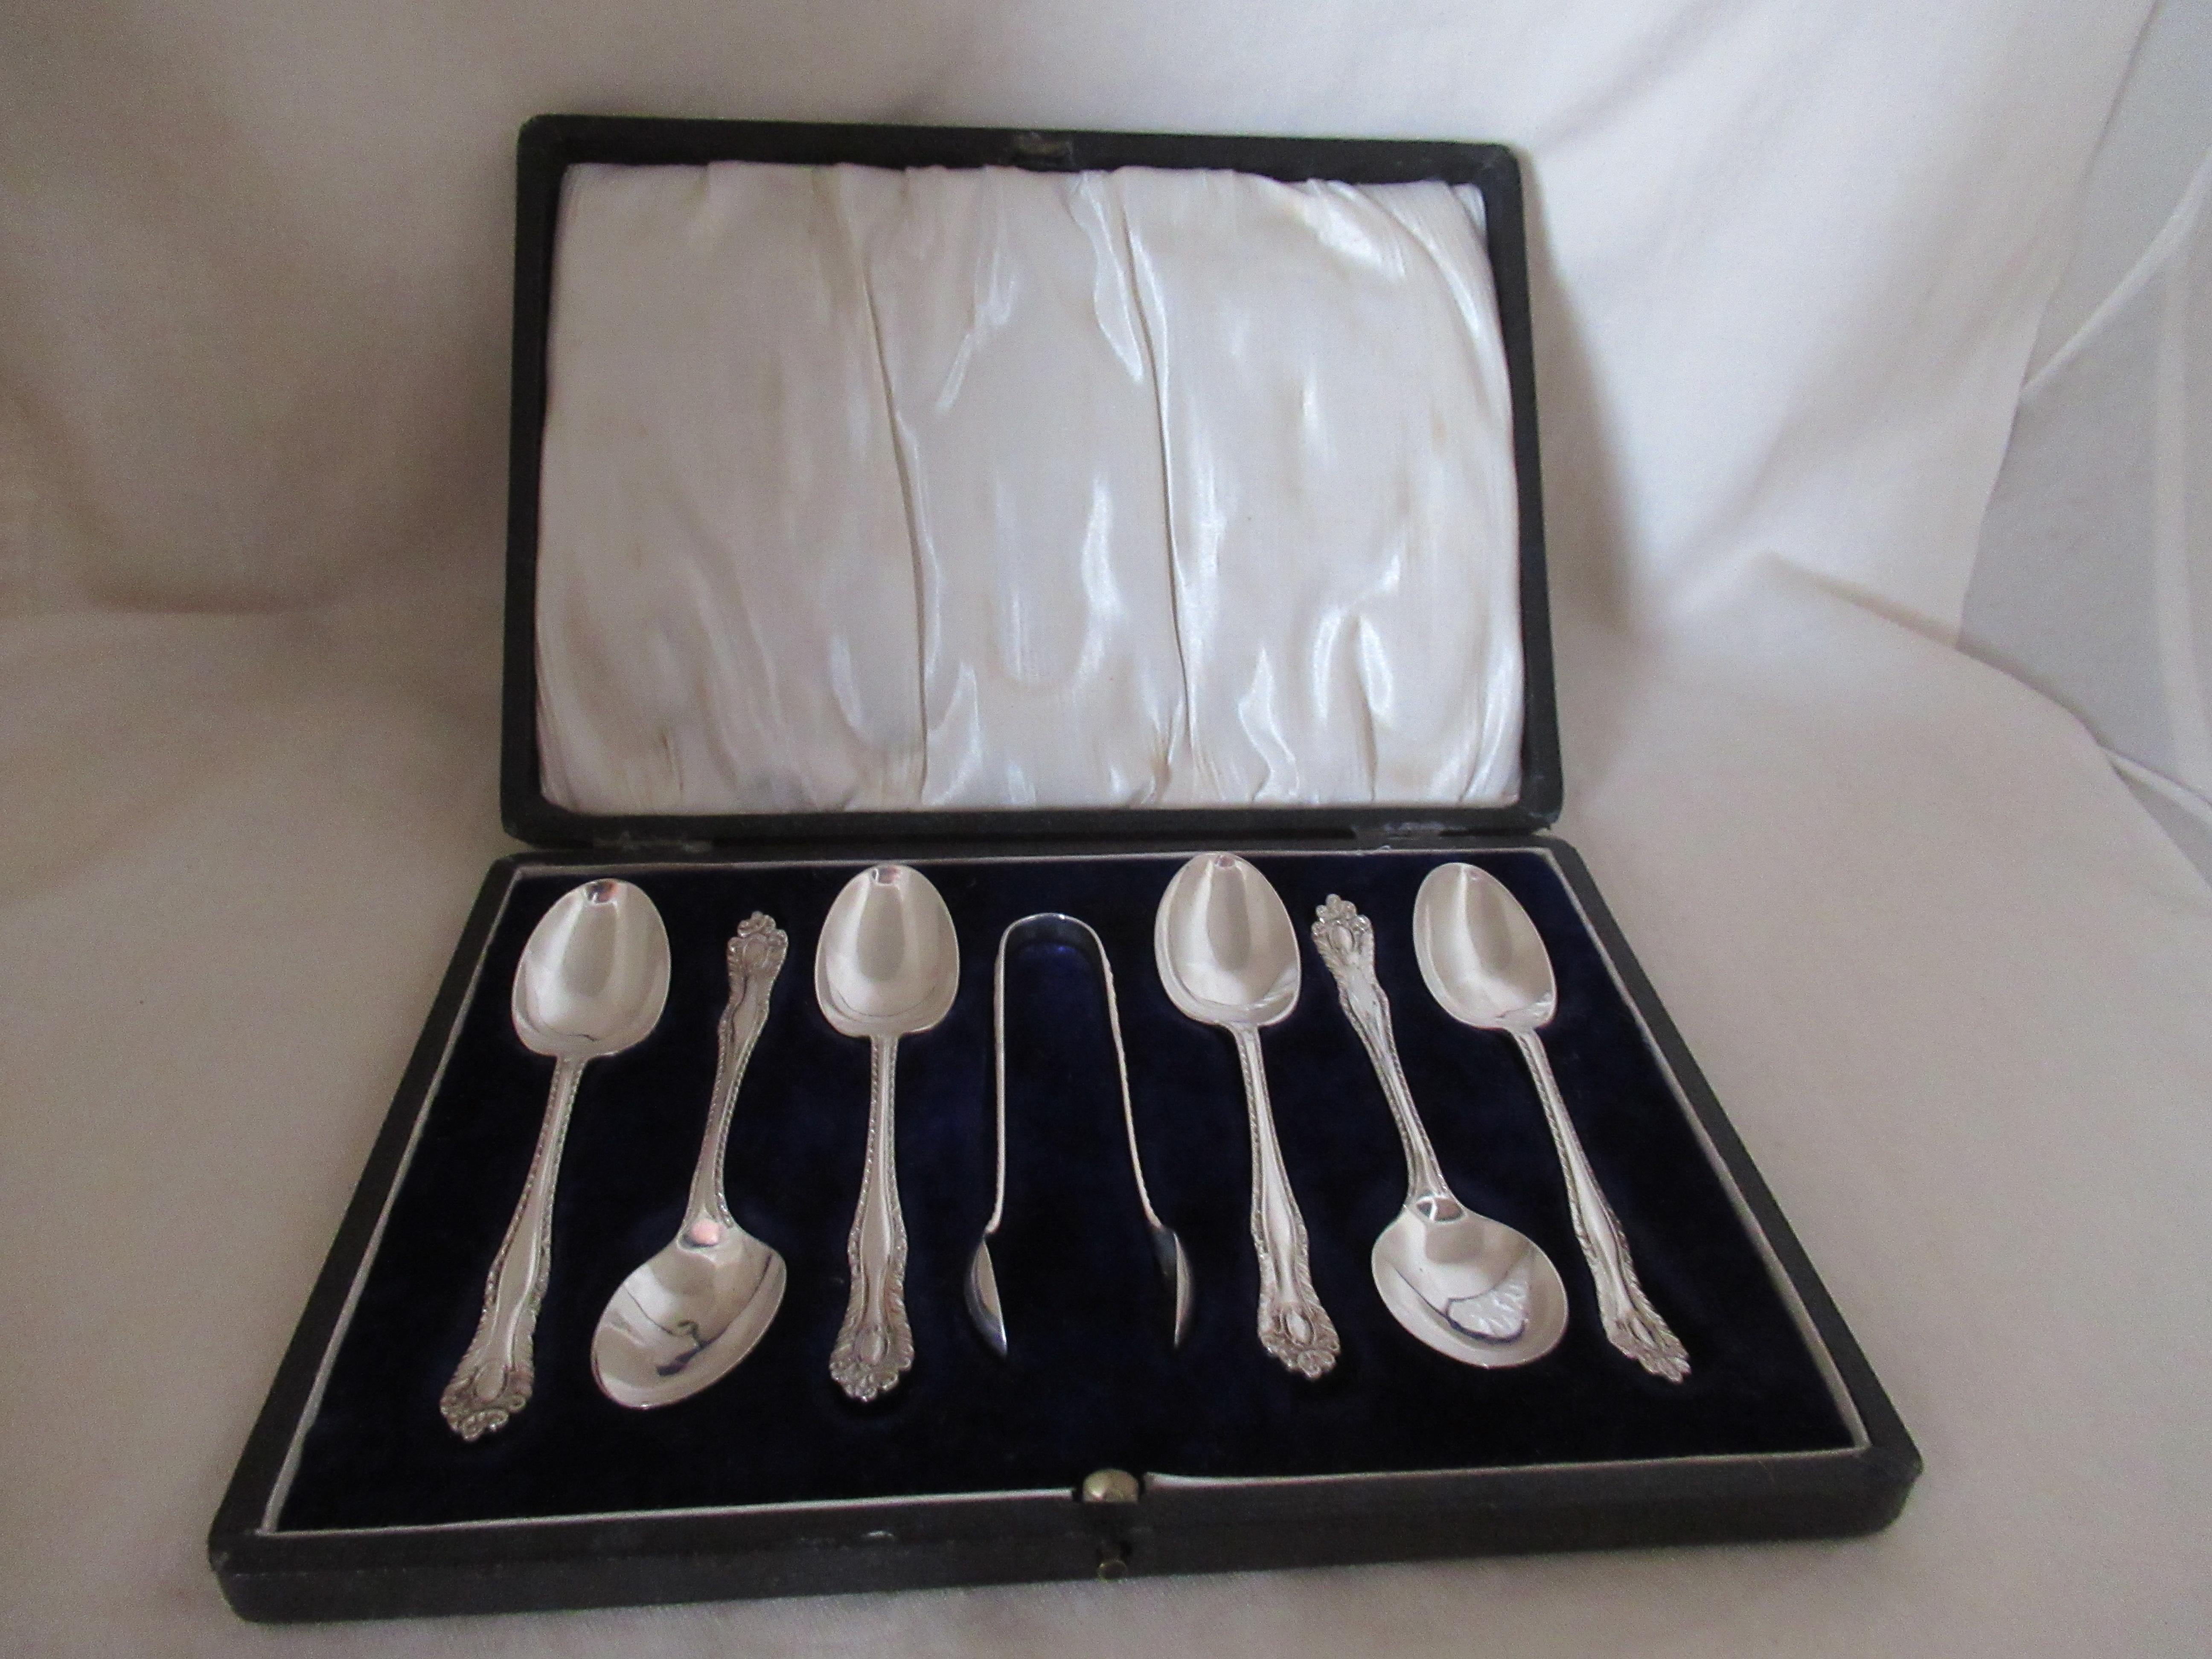 Solid Sterling Silver - BOX of 6 SUPERB & PRETTY TEASPOONS & TONGS
Complete English hallmarks showing they were made in Birmingham in 1891
Hallmarks applied by the Birmingham Assay Office:-
 Anchor - Birmingham Assay Office
 Lion - Sterling